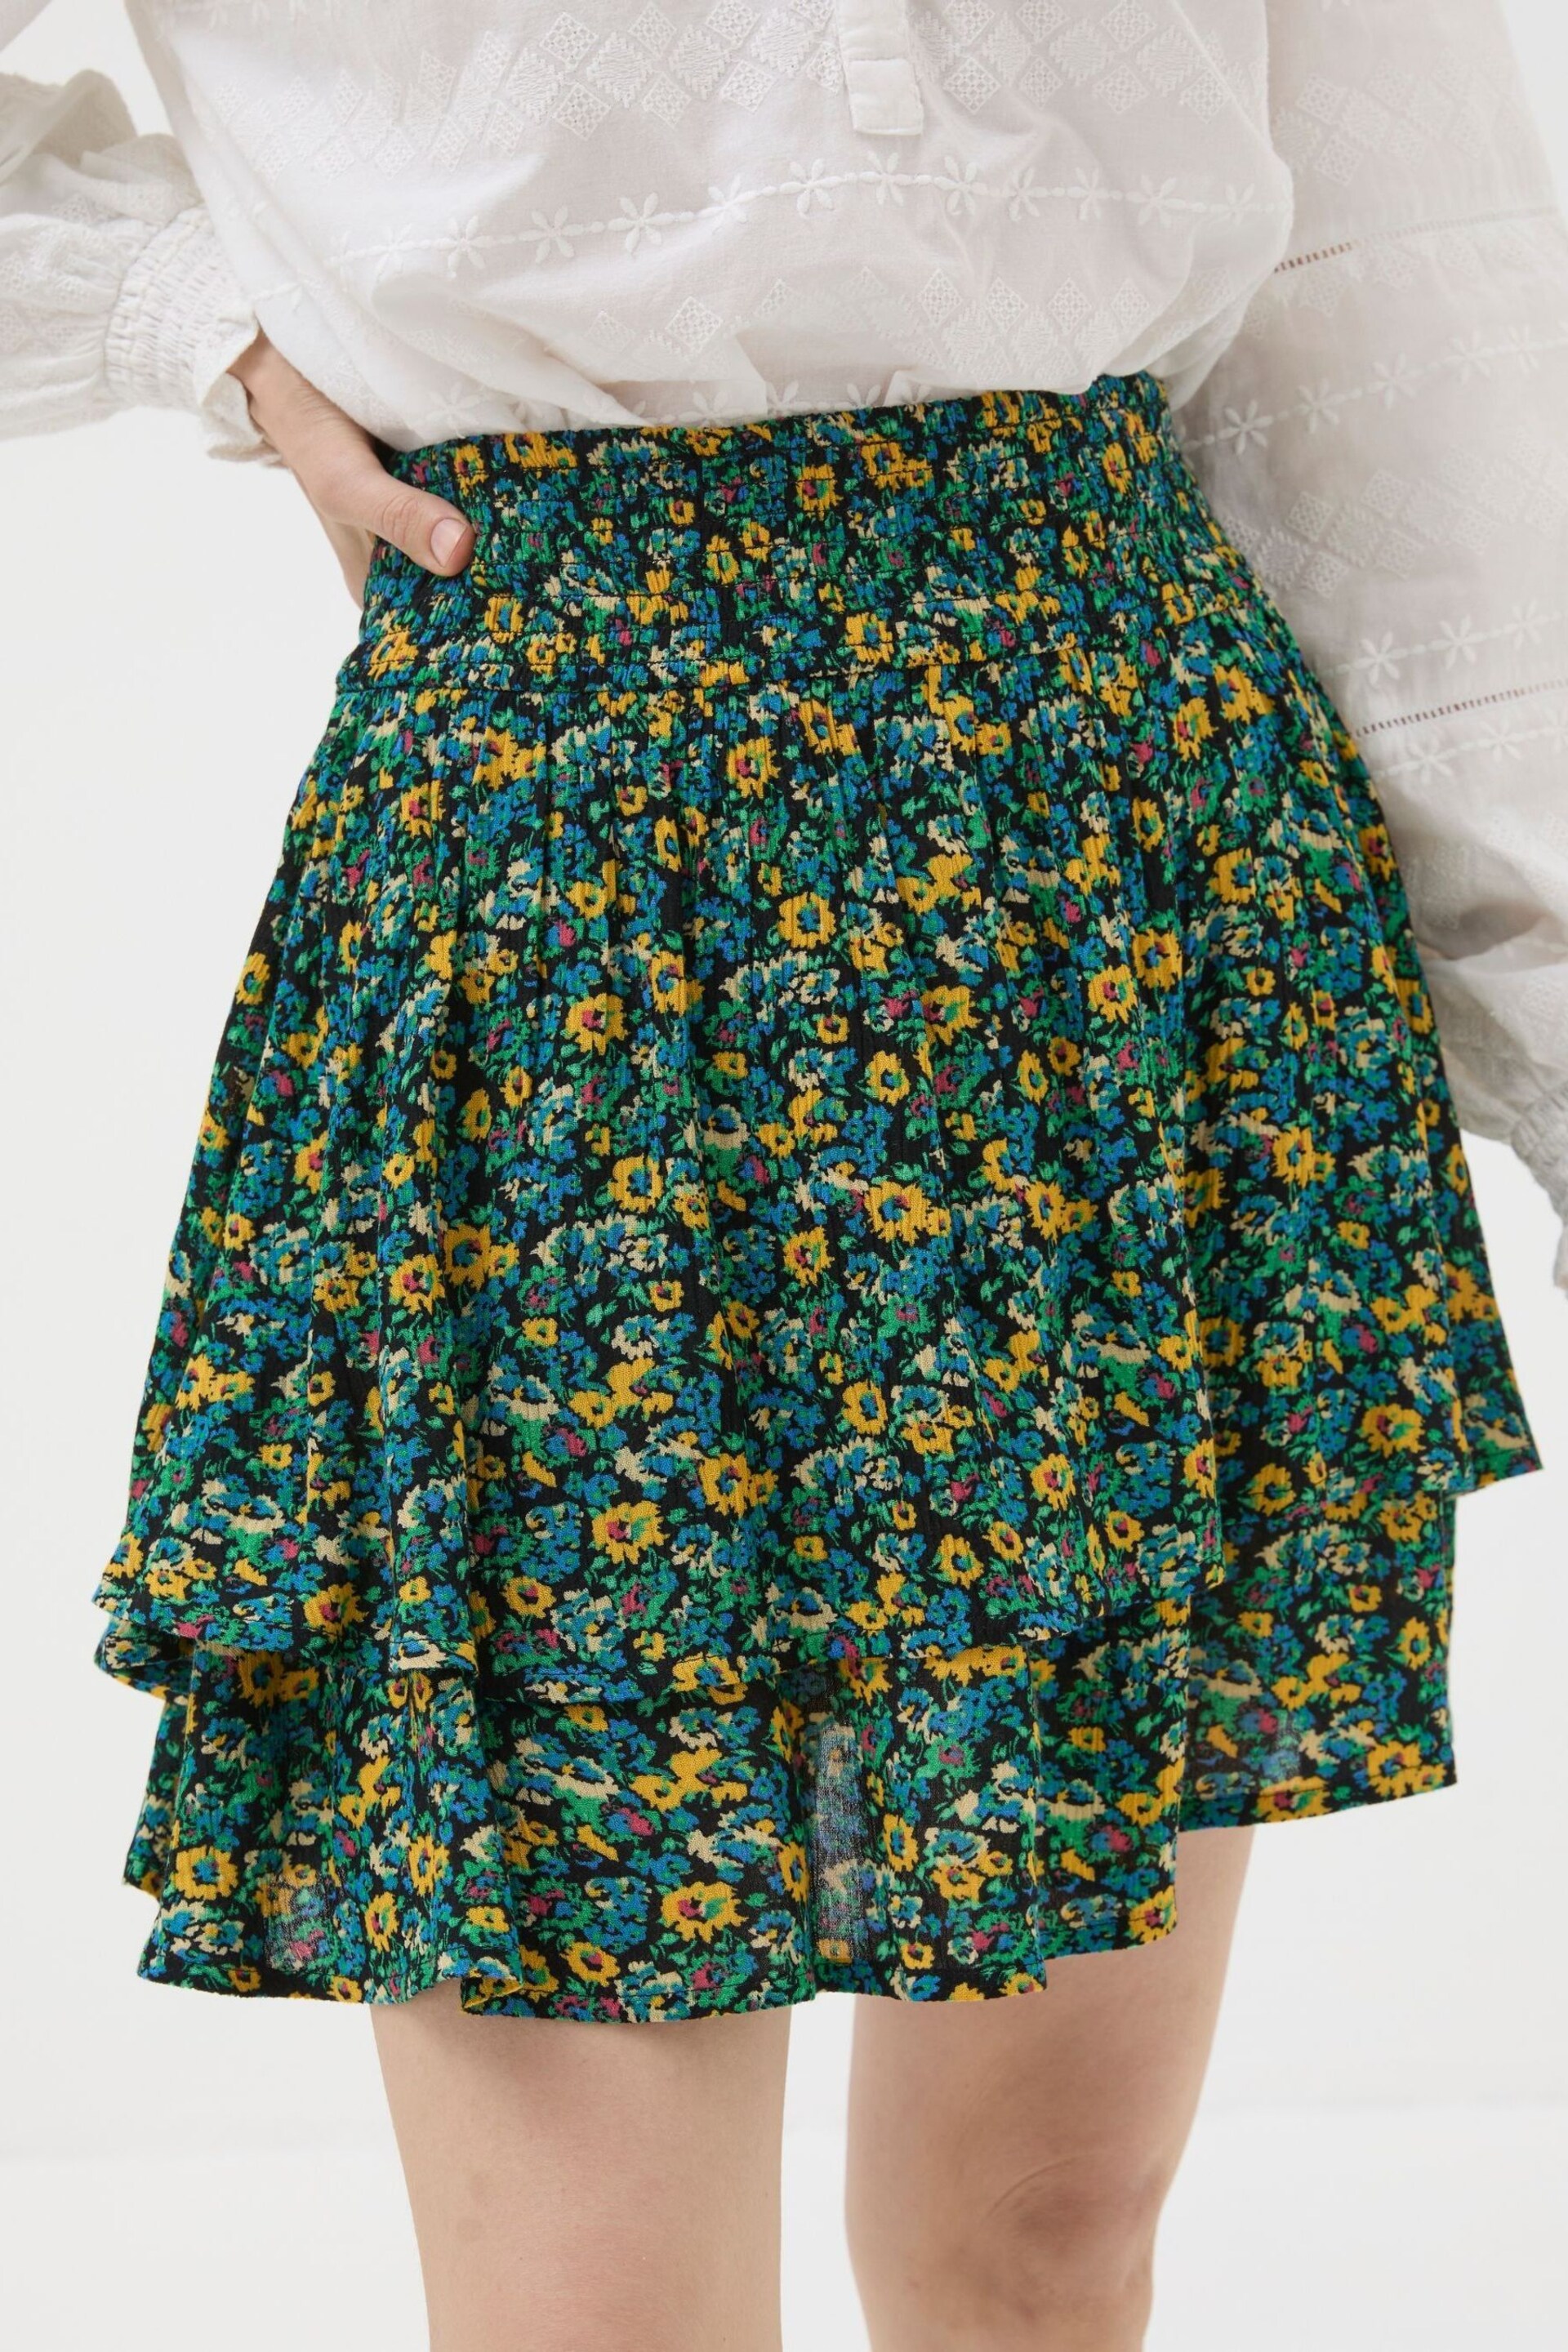 FatFace Green Ali Spring Floral Skirt - Image 2 of 5